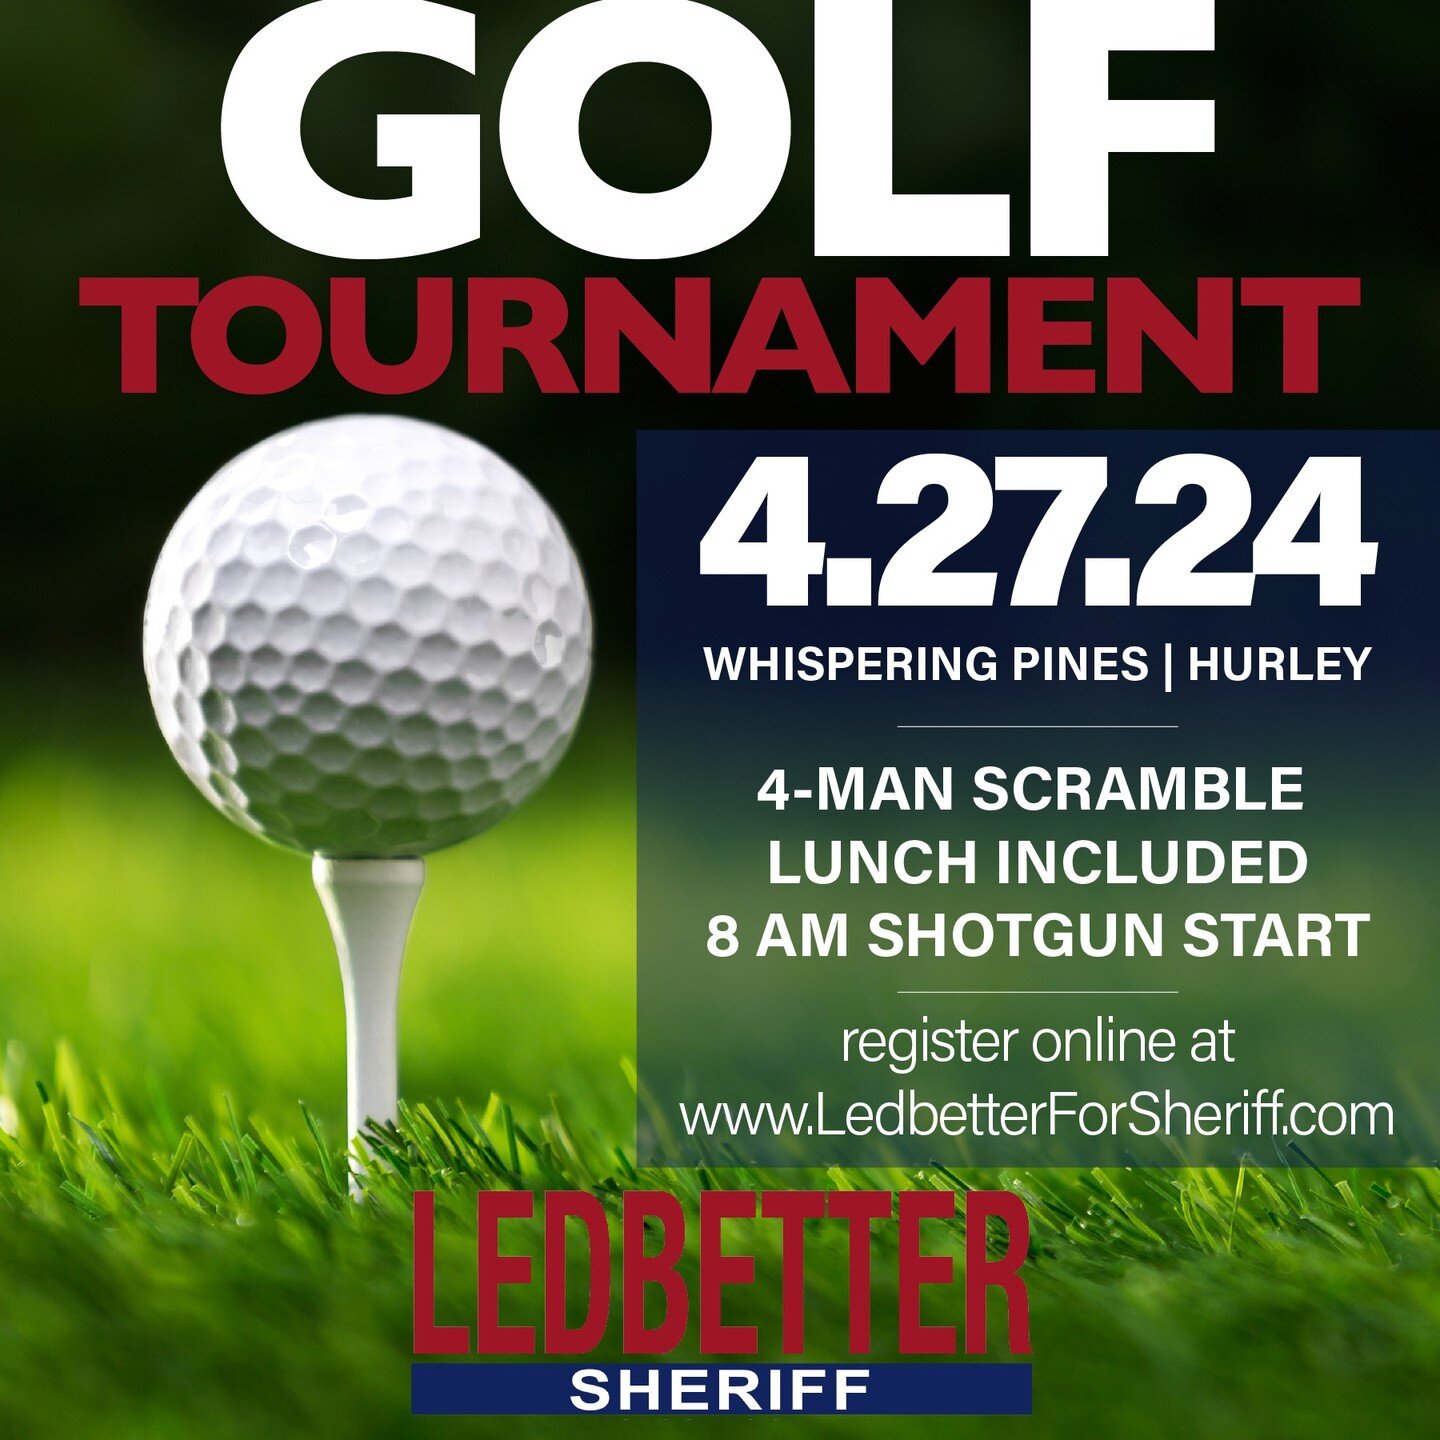 Join Sheriff John Ledbetter for the LEDBETTER GOLF TOURNAMENT on Saturday, April 27, at Whispering Pines in Hurley. 4-man scramble, lunch included, shotgun start at 8 am. Also featuring red tee, mulligans, closest to the pin, and 1st and 2nd place te